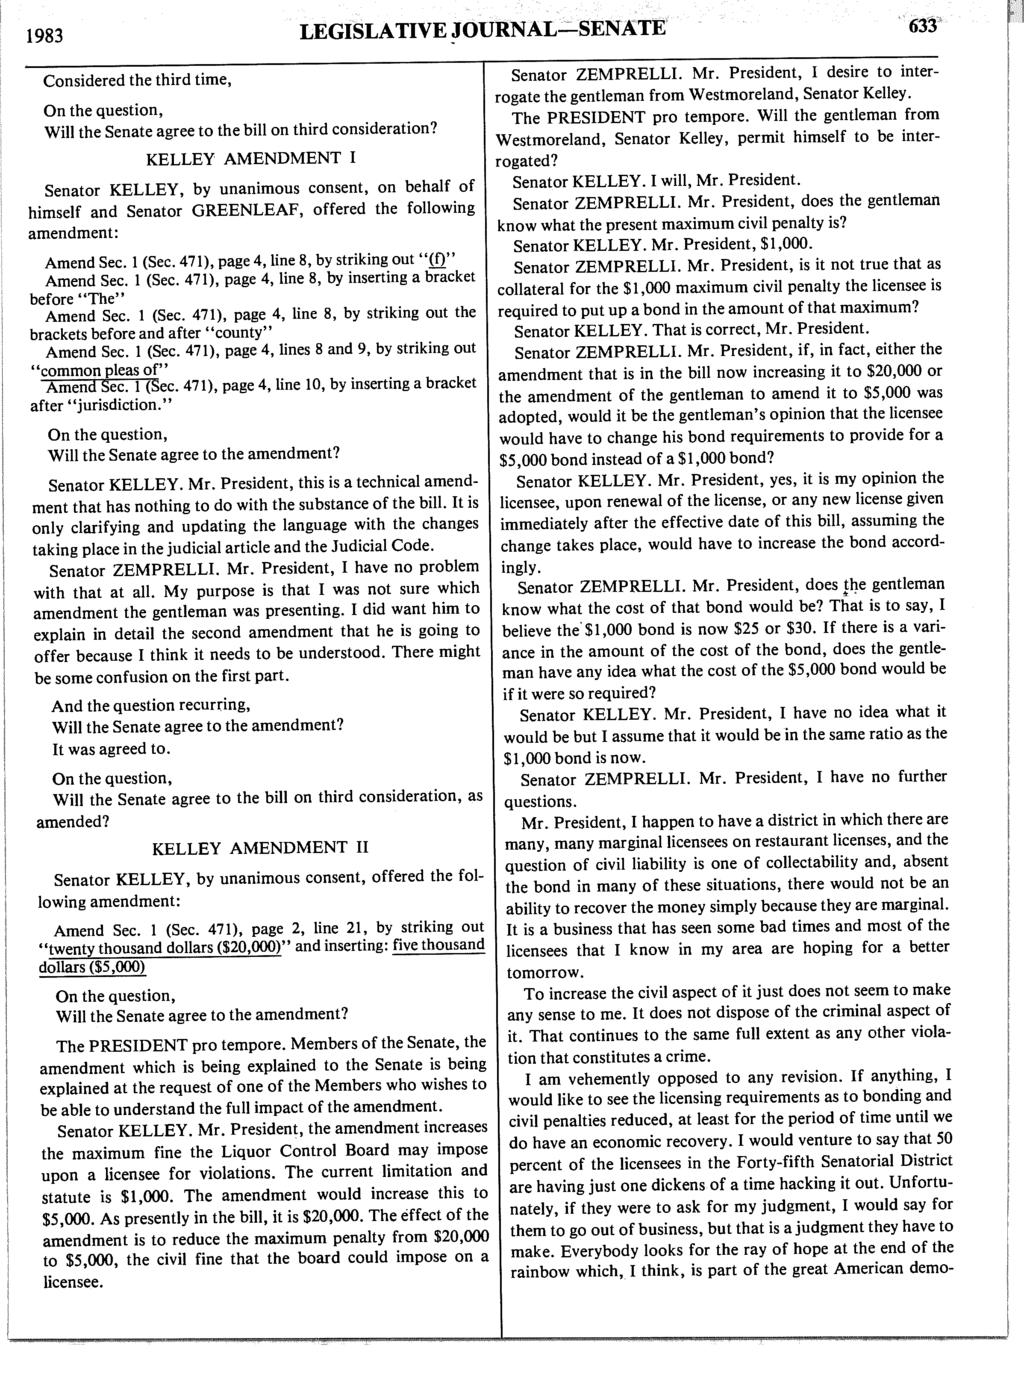 1983 LEGISLATIVE JOURNAL-SENATE' 633" Considered the third time, Will the Senate agree to the bill on third consideration?